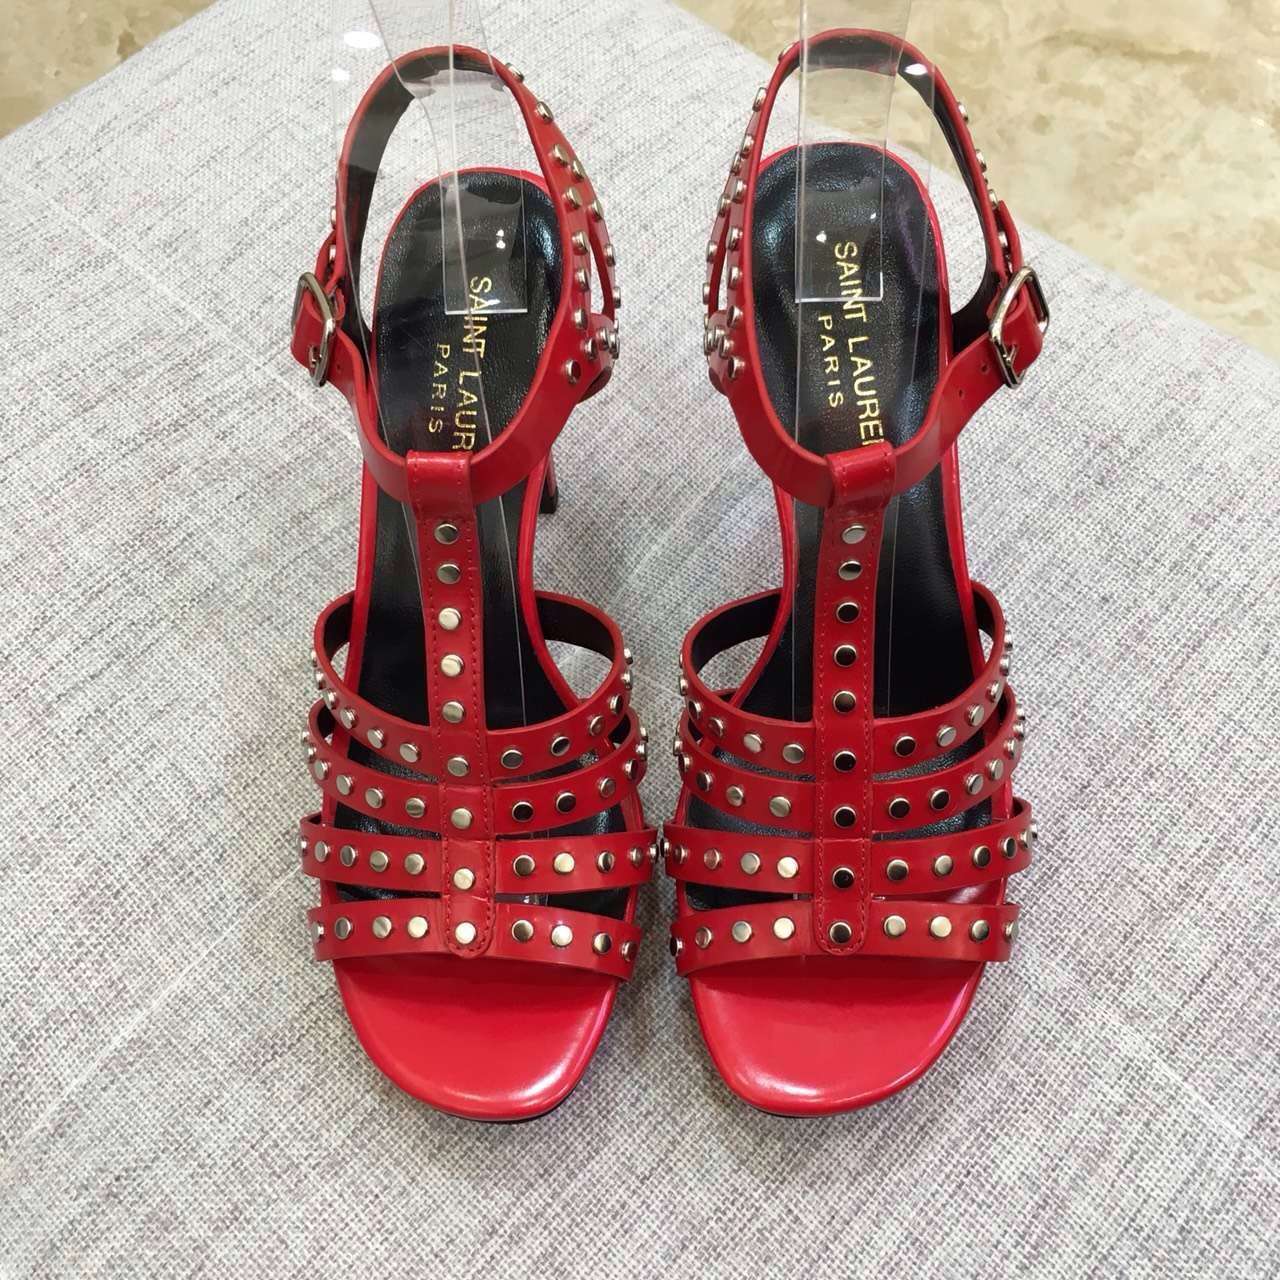 2016 Saint Laurent Shoes Cheap Sale-Saint Laurent Classic TRIBUTE 105 Studded Sandal in Red Leather and Nickel